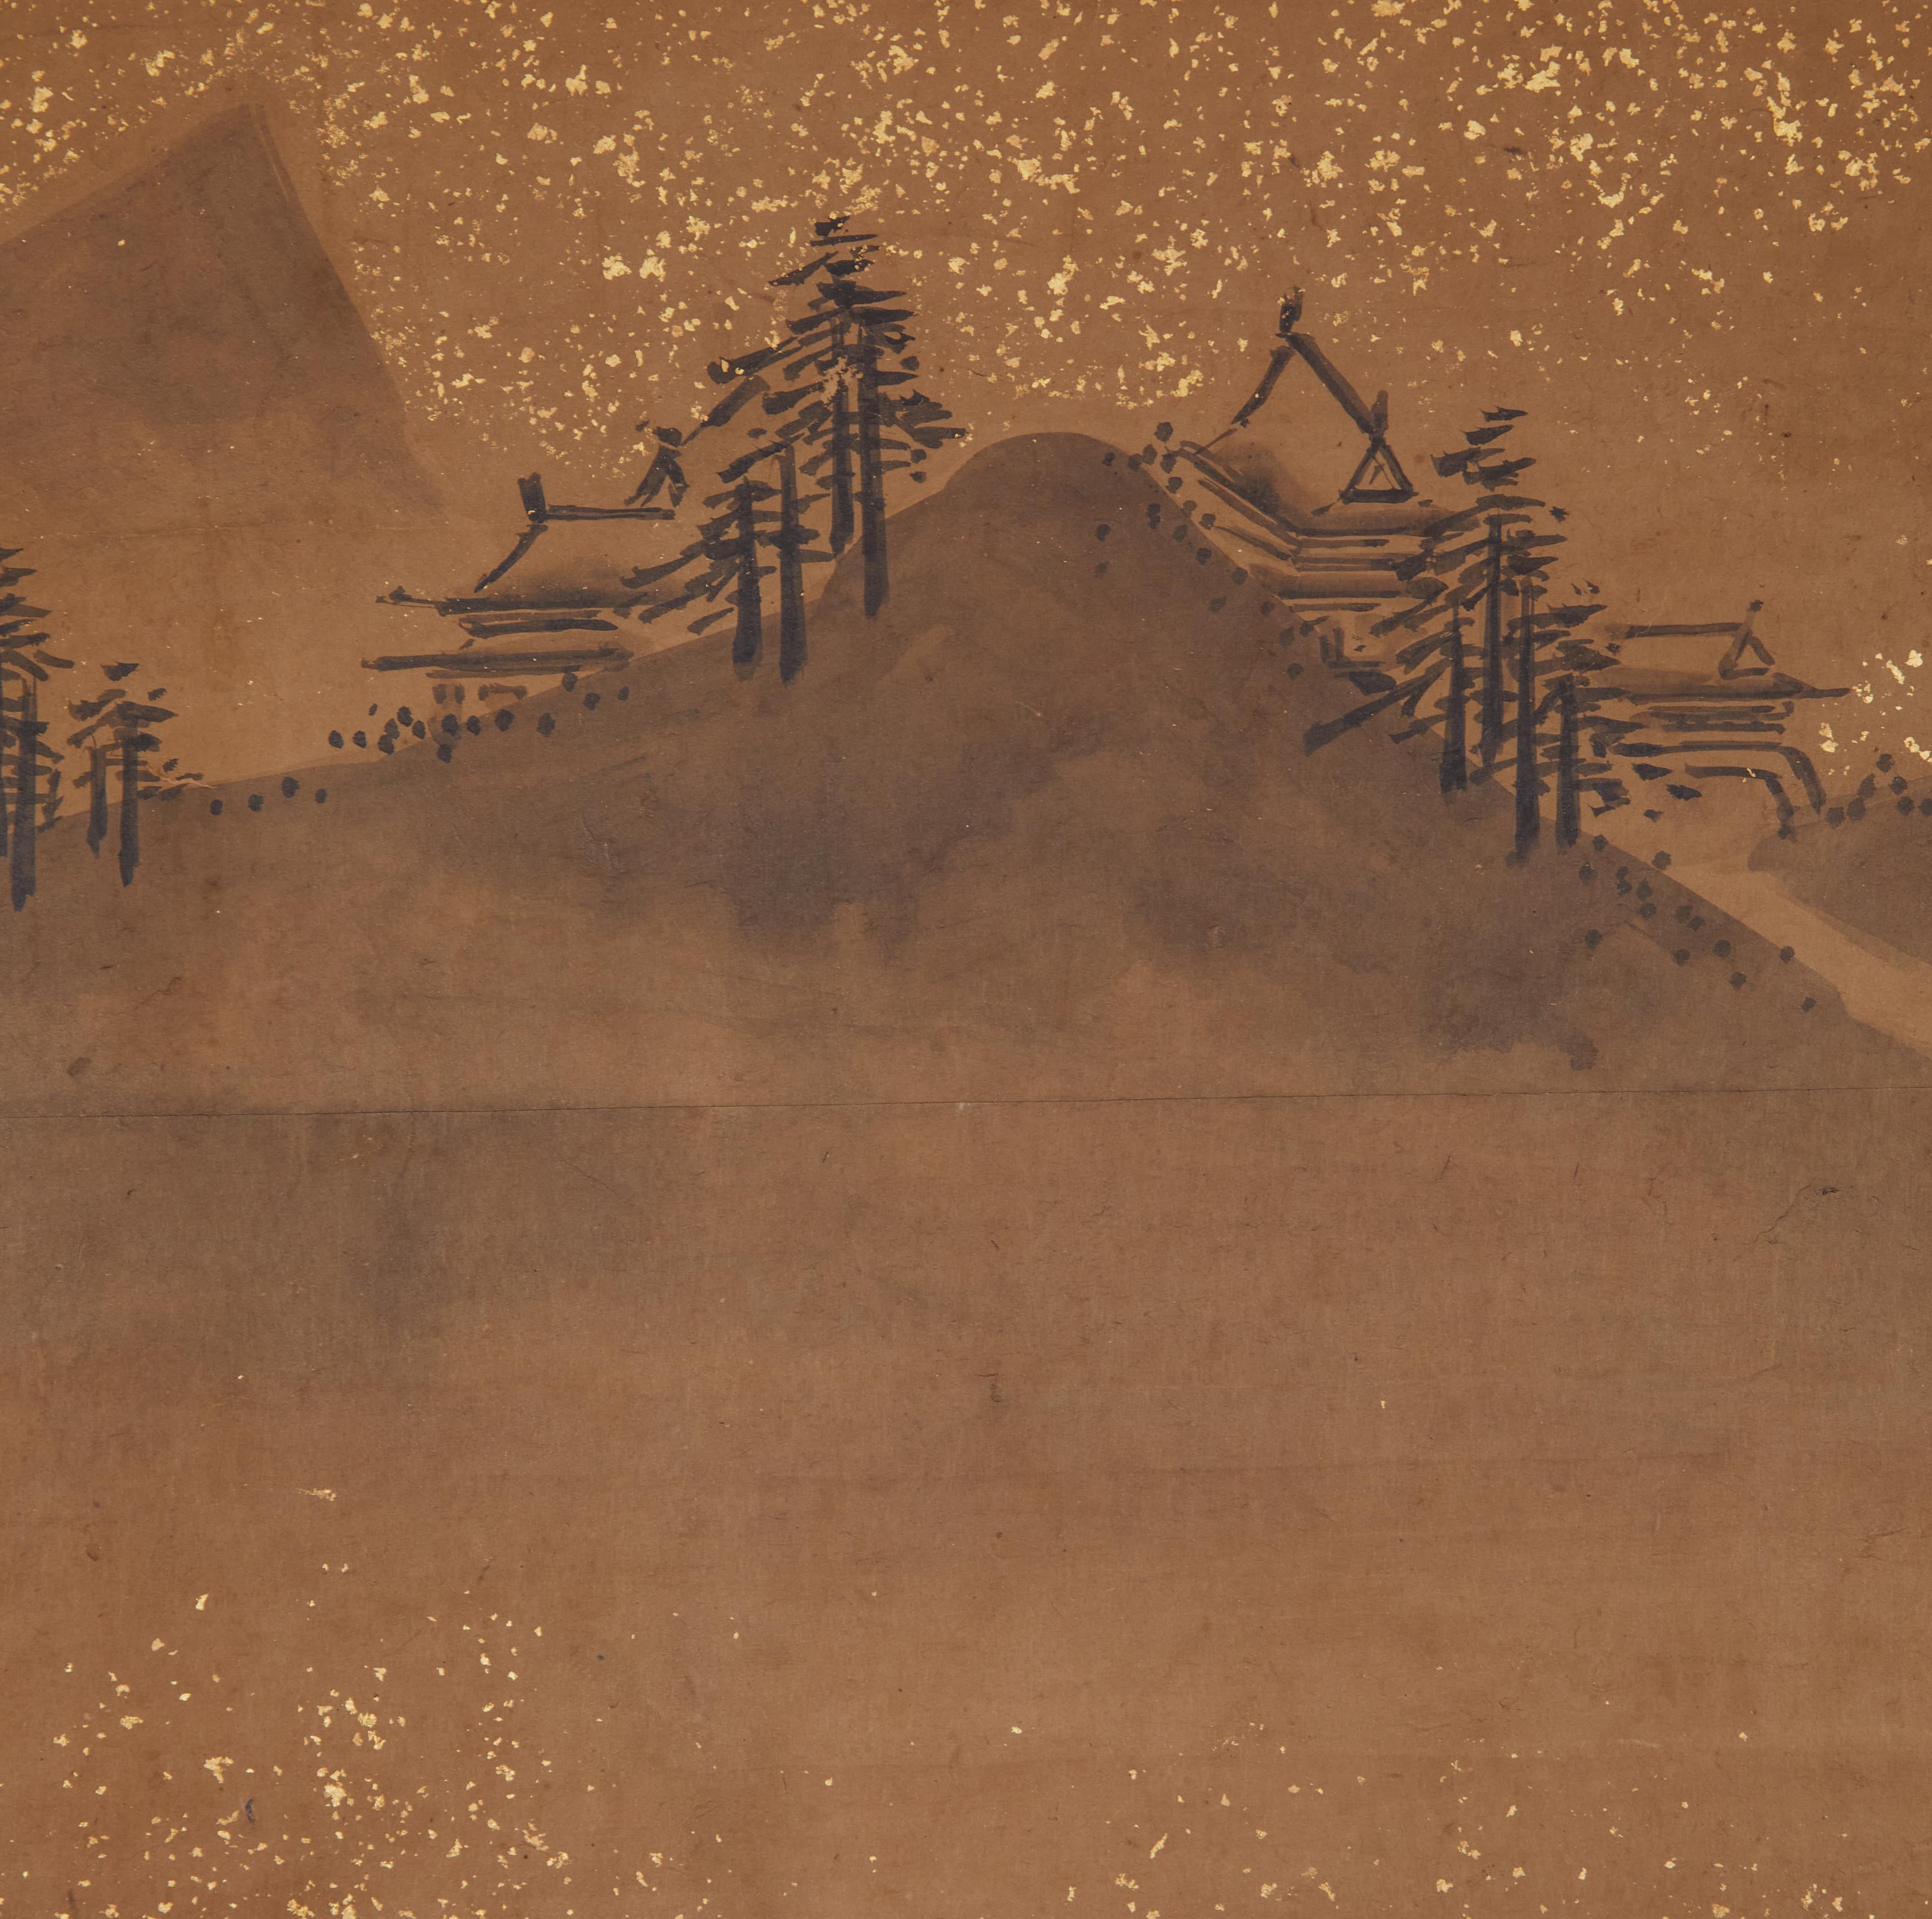 Sesshu-style painting in ink on mulberry paper with gold dust accents and a silk brocade border.